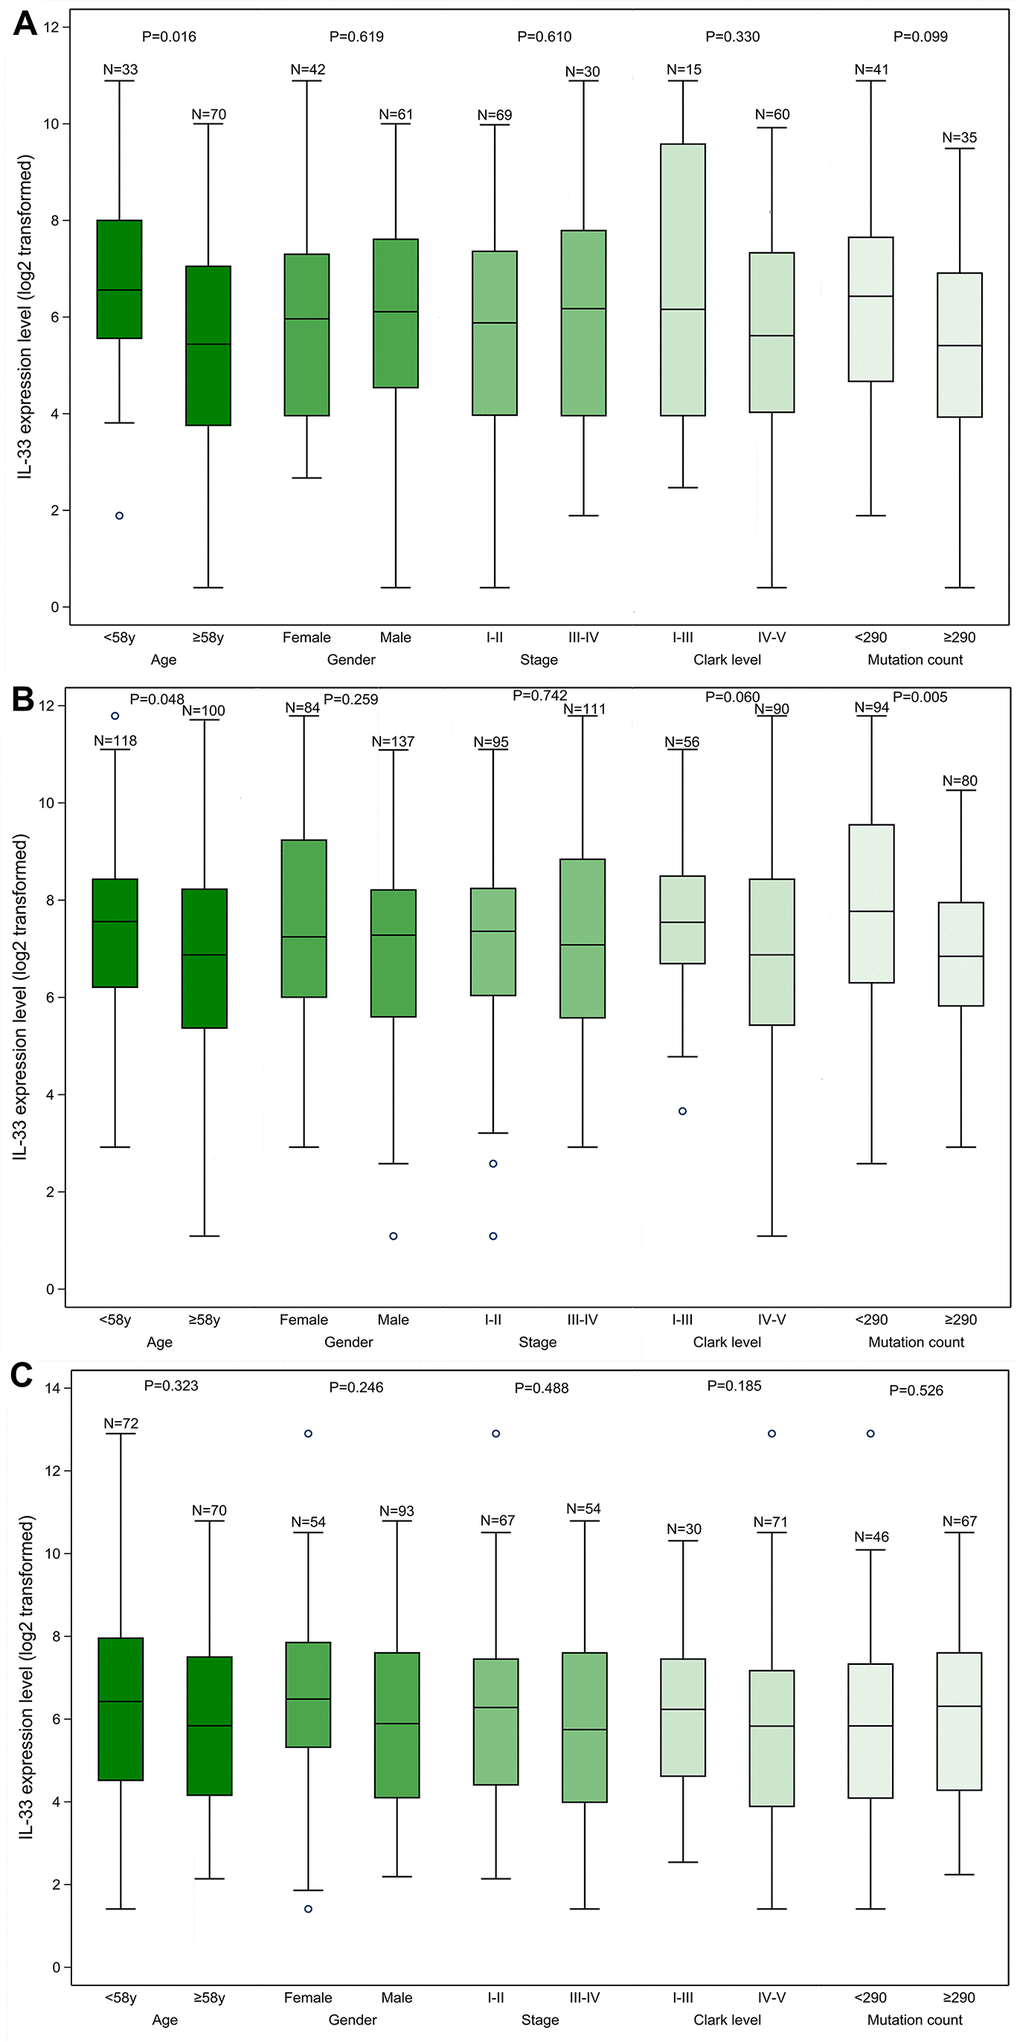 The IL-33 expression level in clinicopathological subgroups. (A) primary melanoma sub-cohort; (B) lymph node metastasis sub-cohort; (C) other metastasis sub-cohort. Boxplots represent values within the interquartile range (IQR) (boxes) and 1.5 × IQR (whiskers). Outliers are plotted as values > 1.5 × IQR (circles). P-values were calculated by the Mann-Whitney U test.